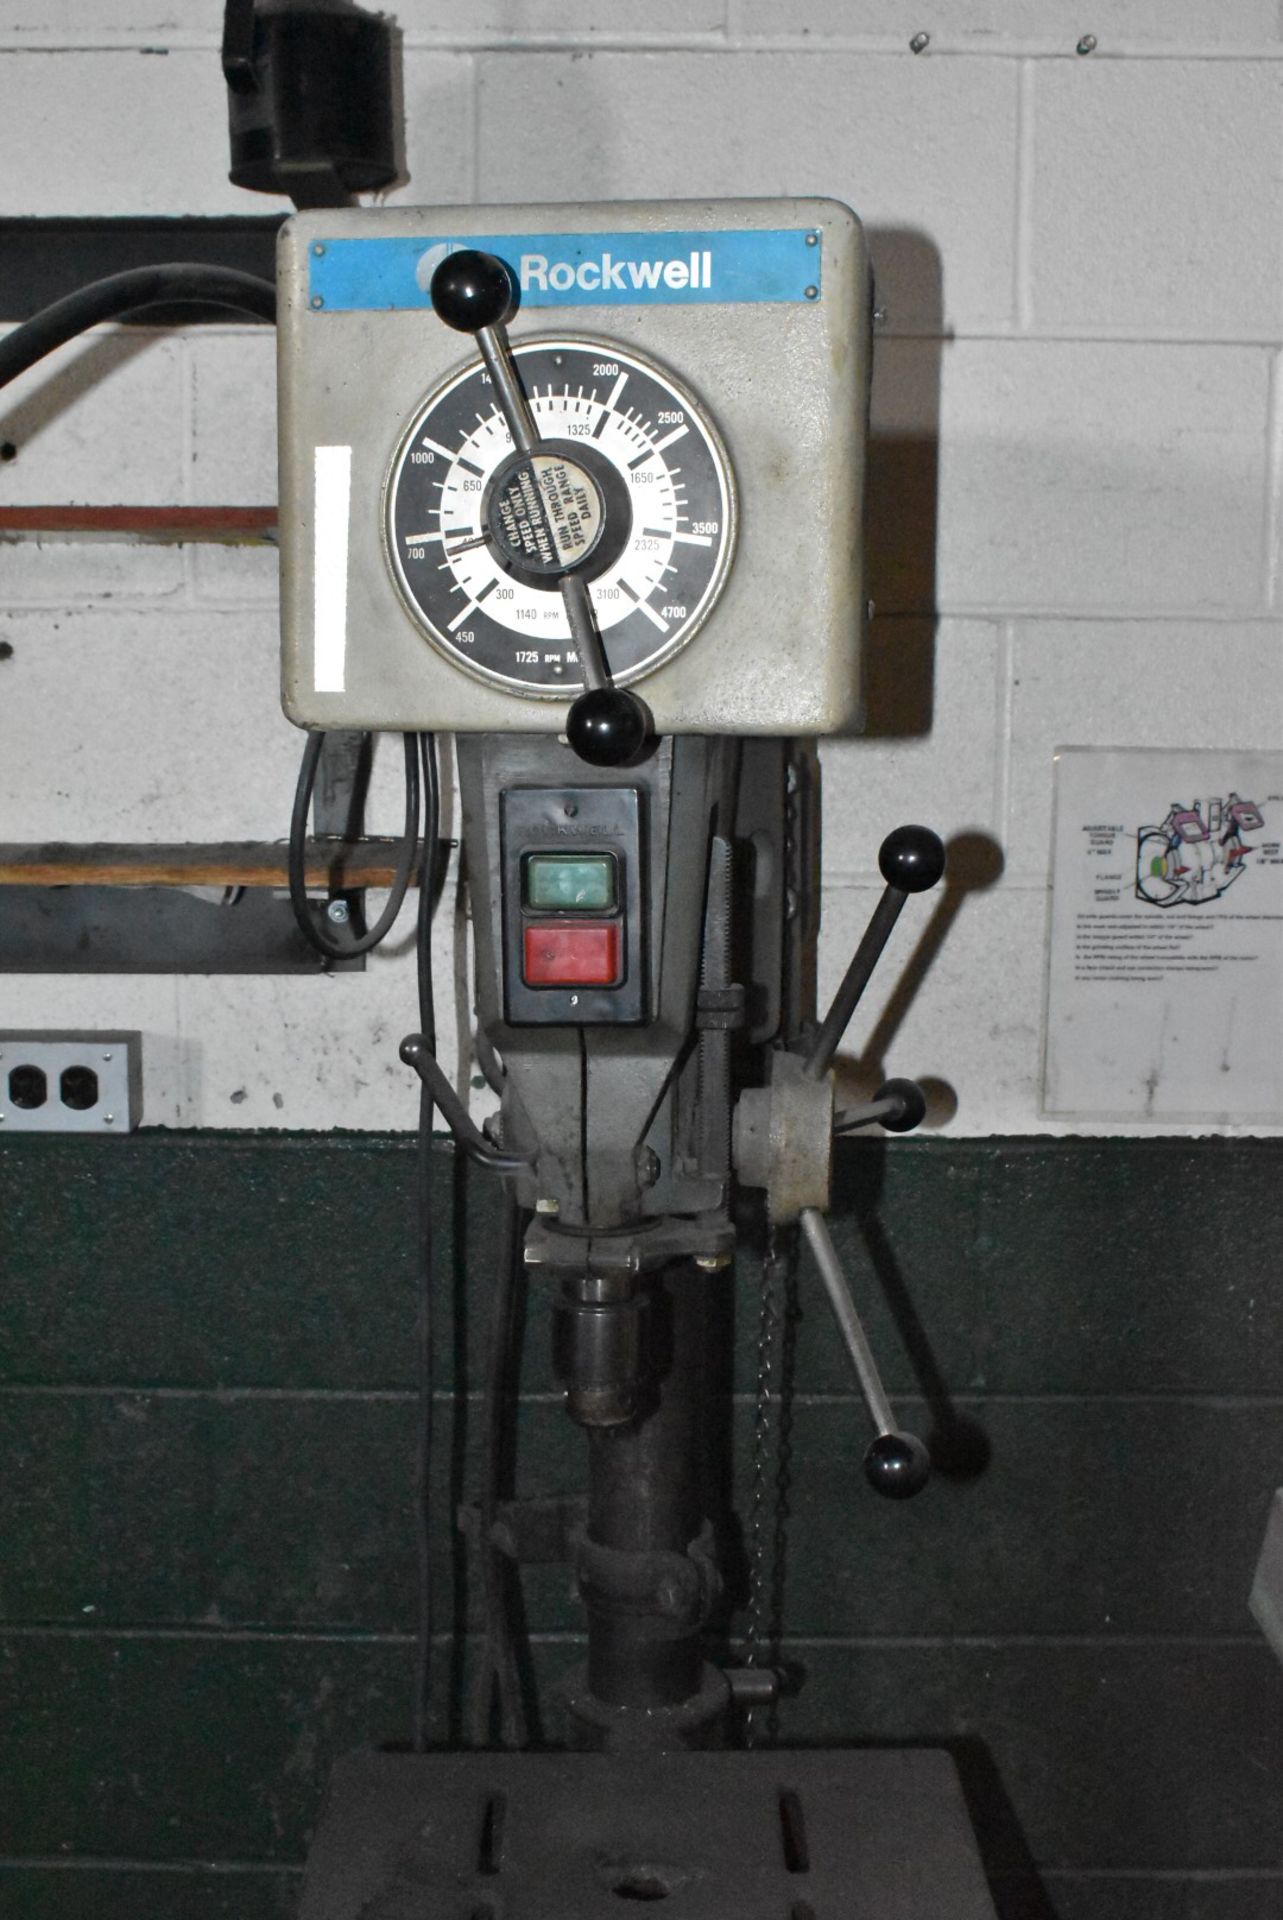 LOT/ ROCKWELL SERIES 15-655 HEAVY DUTY FLOOR TYPE DRILL PRESS WITH SPEEDS TO 3500 RPM, 1.5 HP - Image 2 of 8